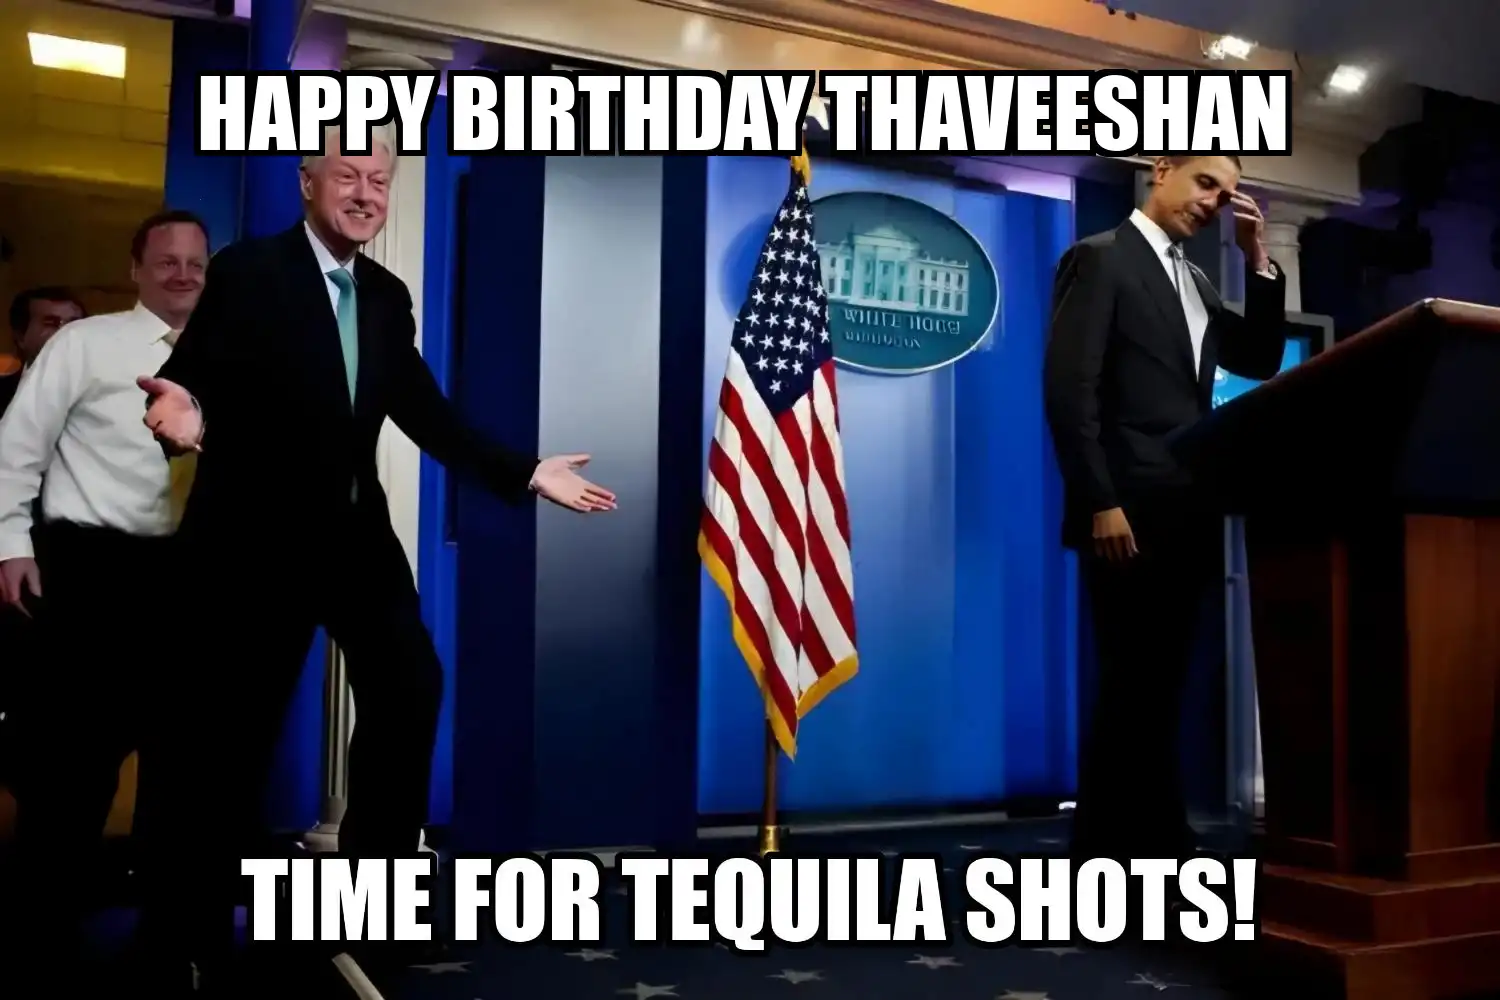 Happy Birthday Thaveeshan Time For Tequila Shots Memes